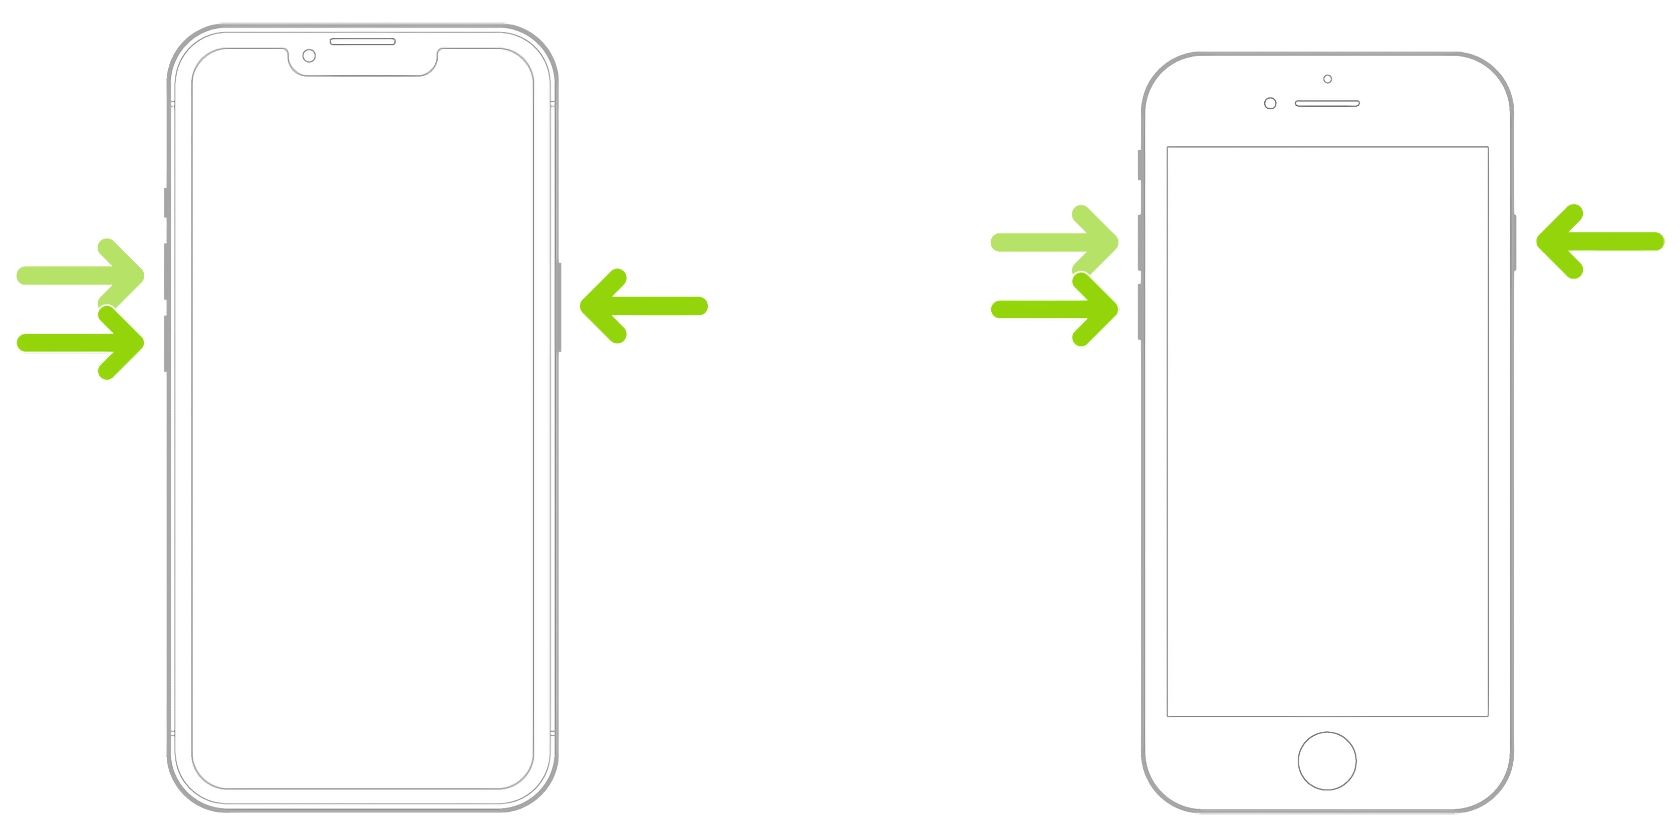 Illustration showing button press combinations to force-restart iPhones with Face ID and older models